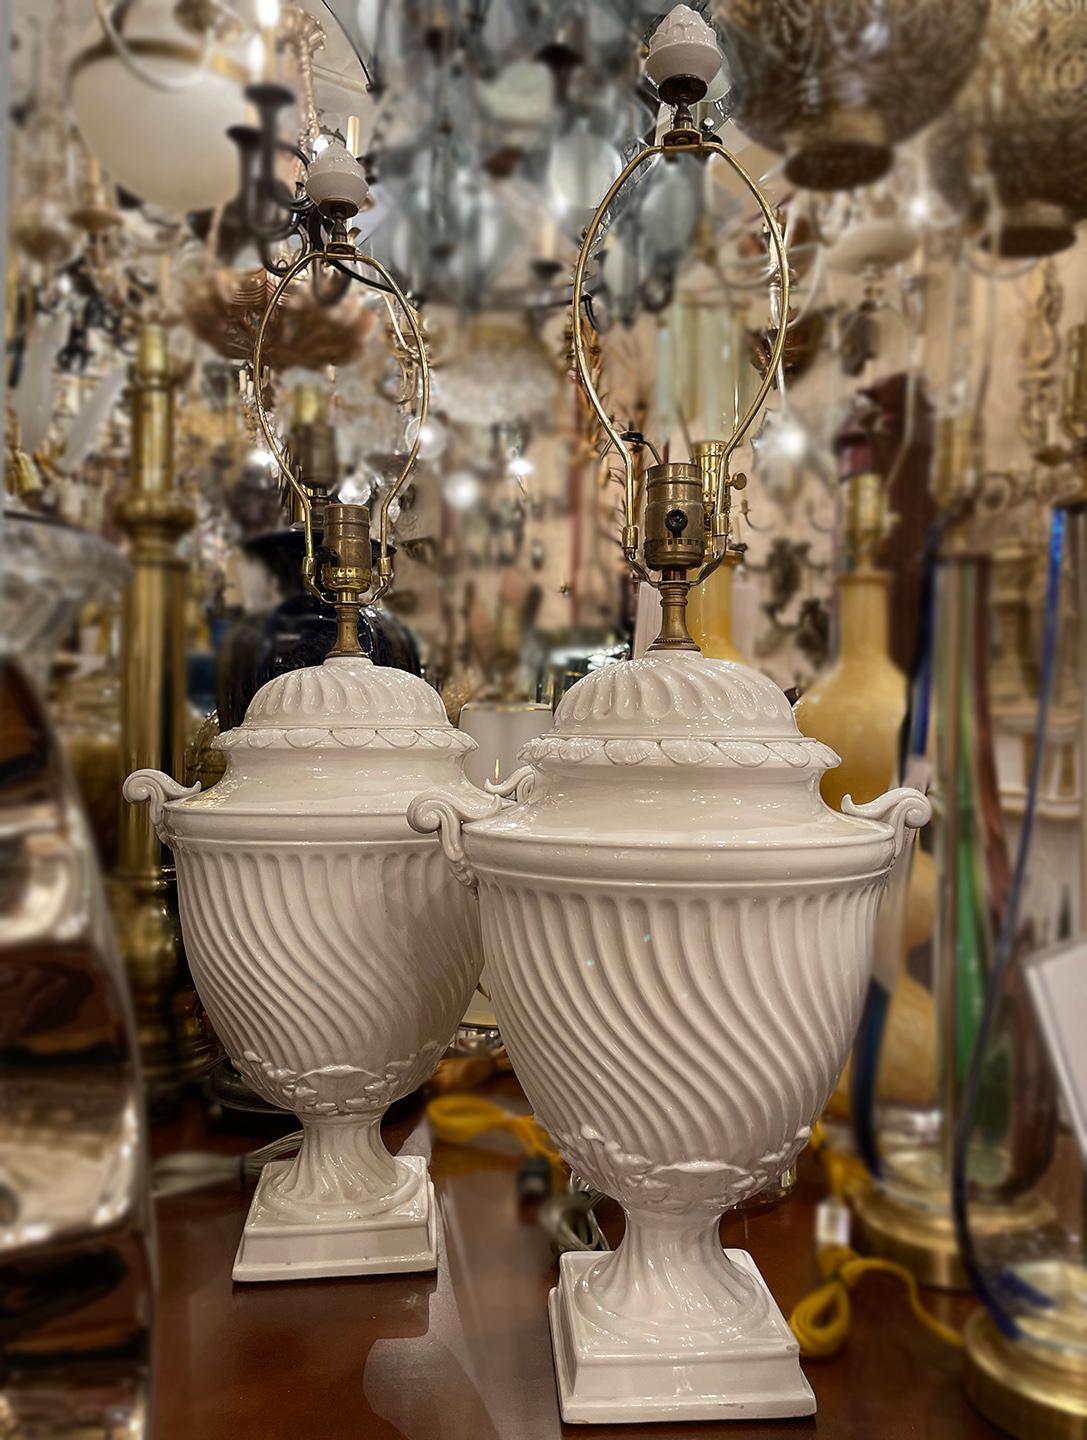 A pair of circa 1920's English porcelain table lamps of neoclassic design.

Measurements:
Height of body: 18